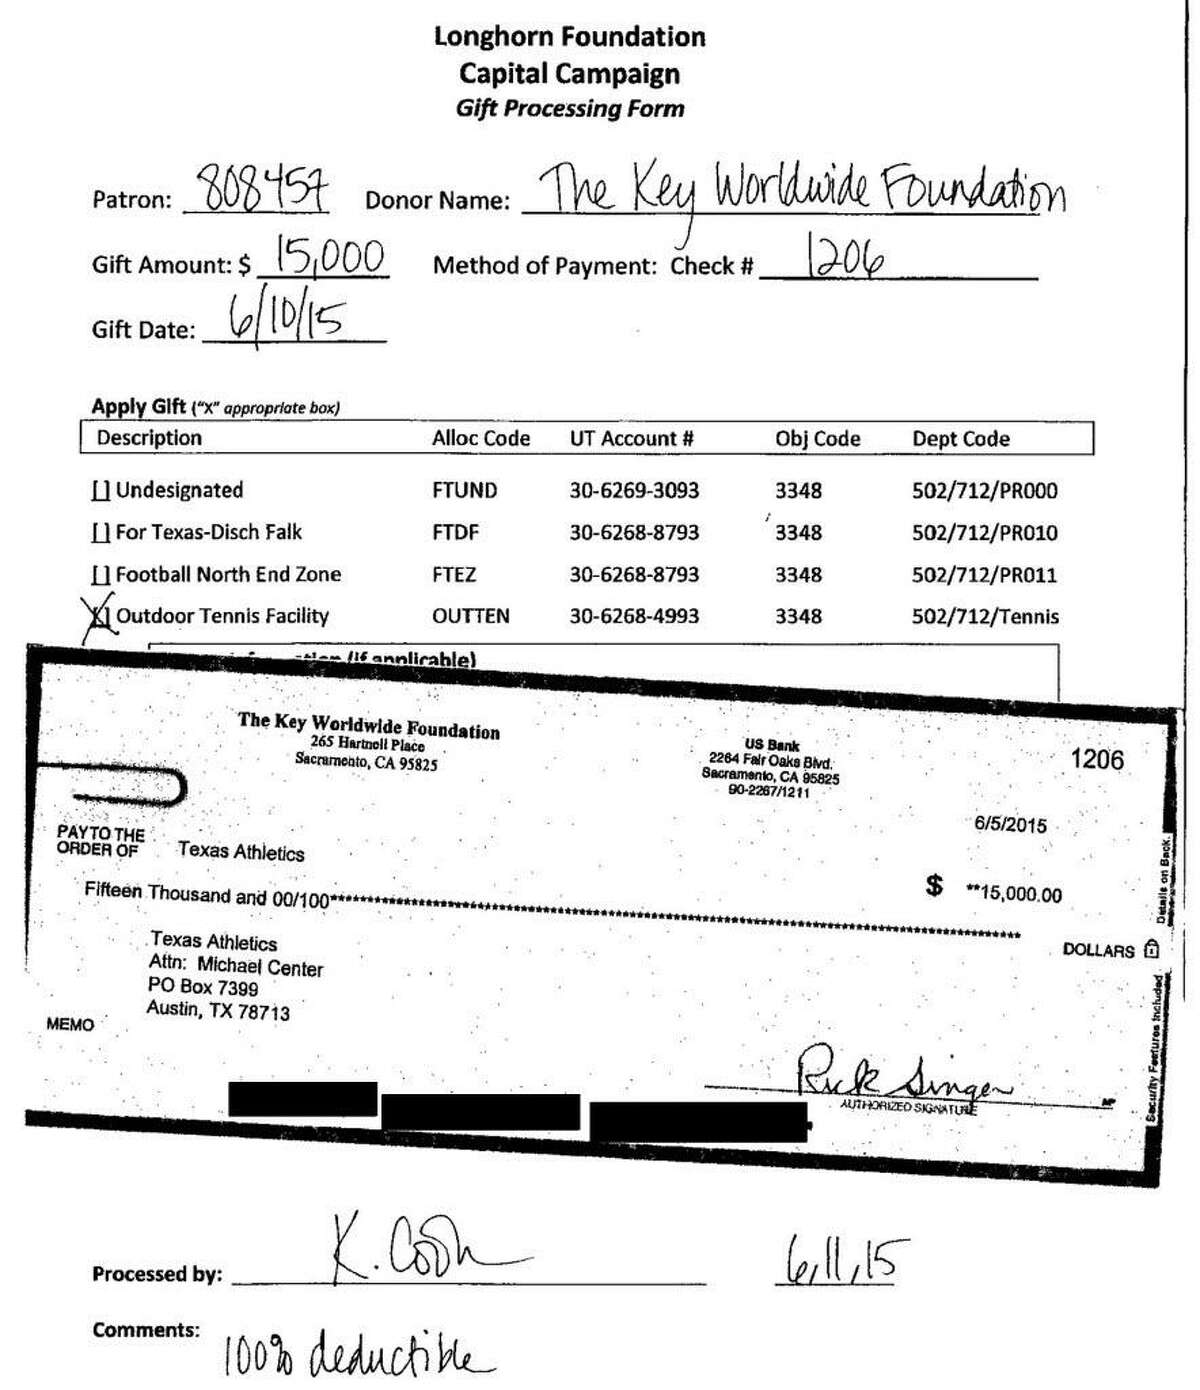 A redacted document obtained from the Houston Chronicle shows that William "Rick" Singer donated $15,000 from the Key Worldwide Foundation, his purported charity behind the college admissions scandal, to University of Texas at Austin's Texas Athletics in 2015. The donation, a check noted as 100 percent deductible, was for an outdoor tennis facility and was the only donation UT-Austin had record of in March 2019 following the breaking news of the college scandal, according to the university. Federal tax documents from 2015 and 2016, however, showed the foundation had a total of more than $500,000, prompting the school to do an internal investigation.